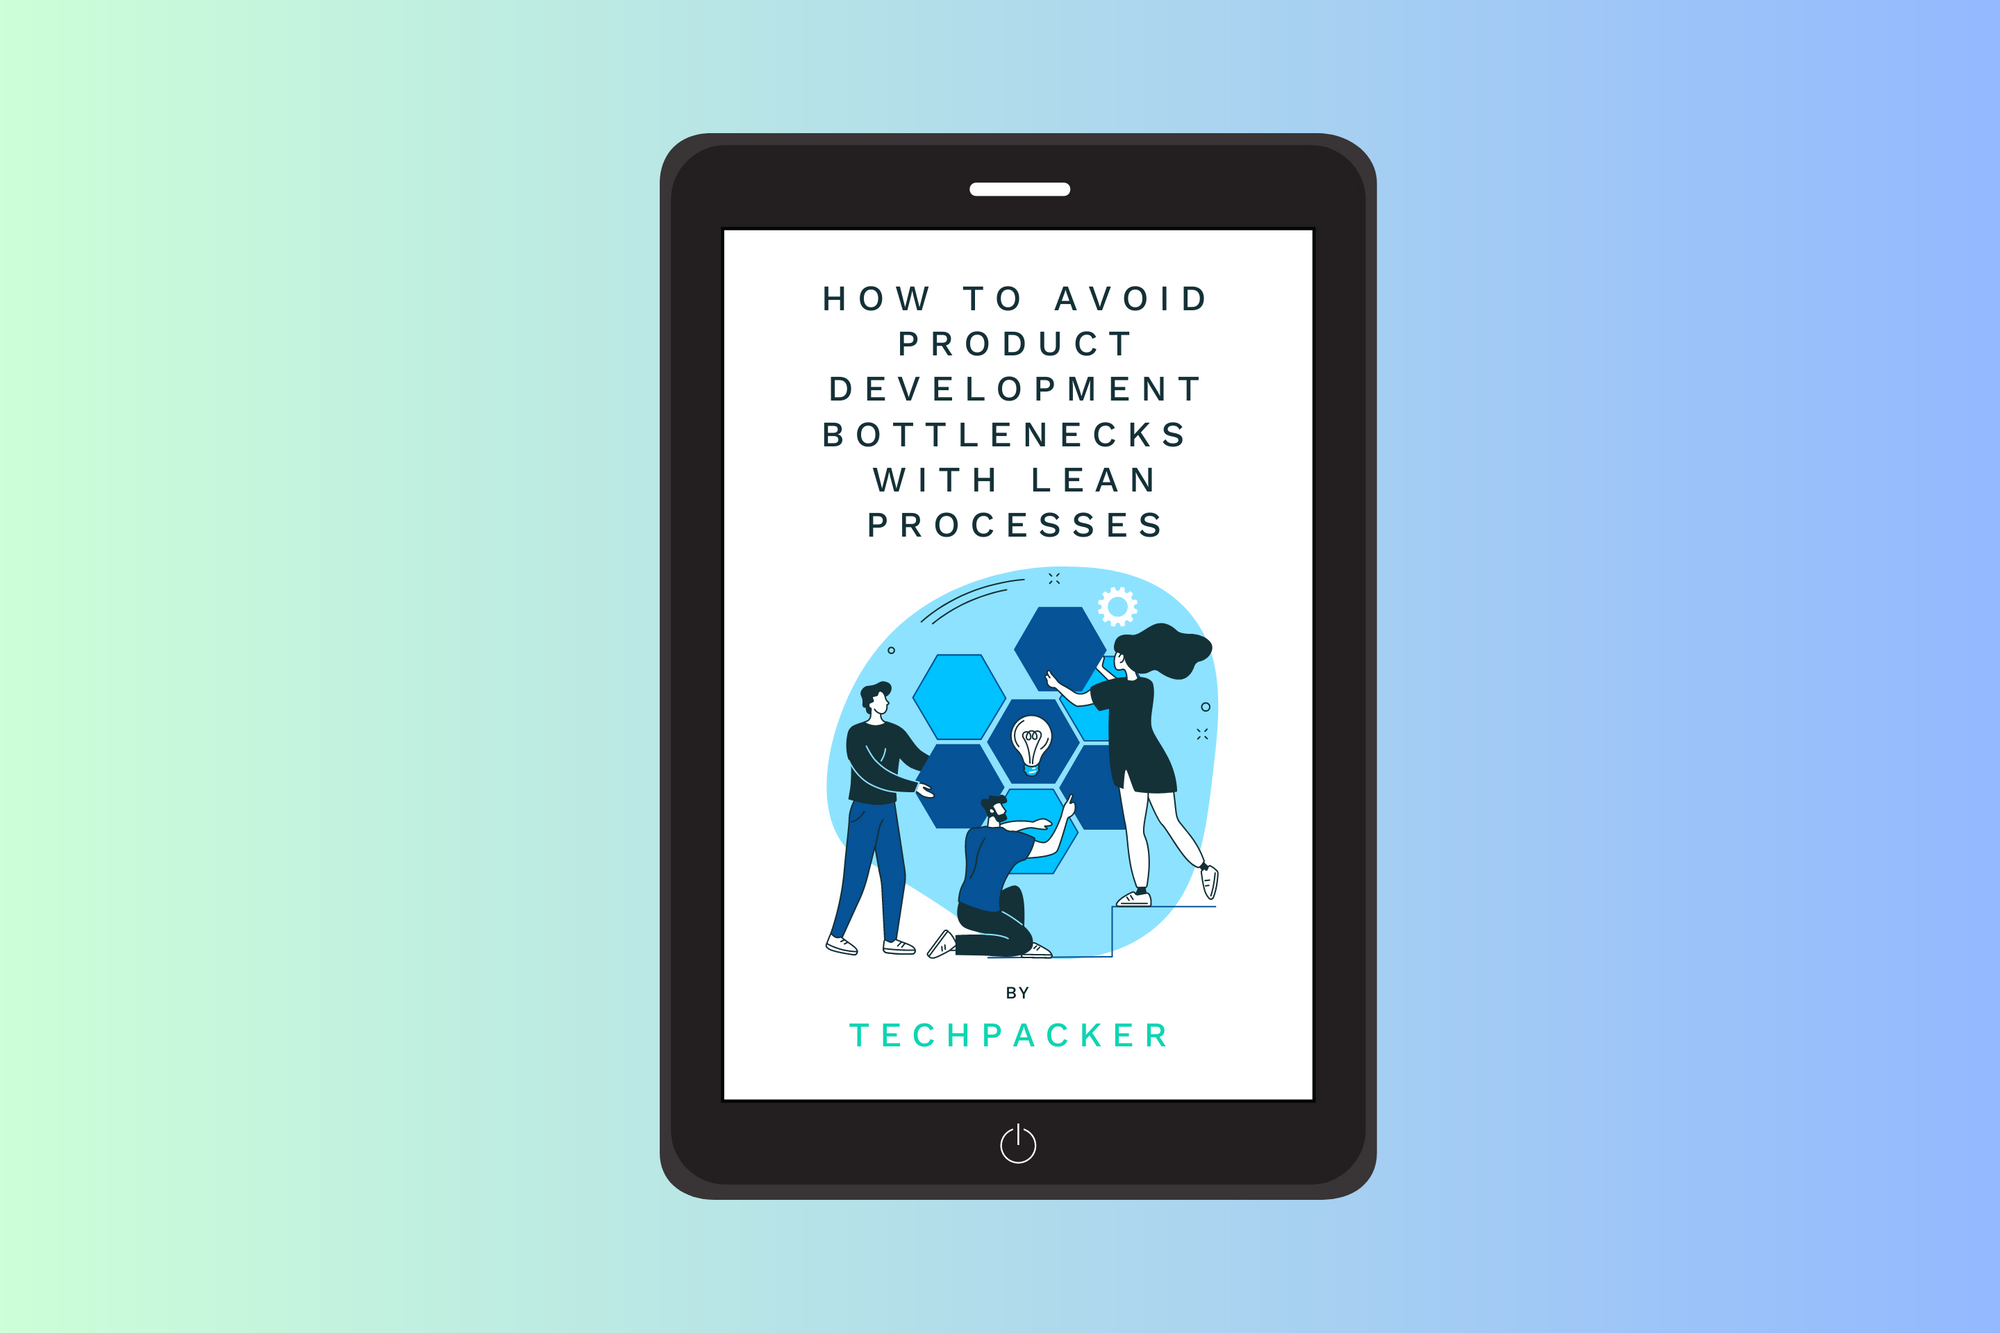 Ebook: How to Avoid Product Development Bottlenecks  with Lean Processes